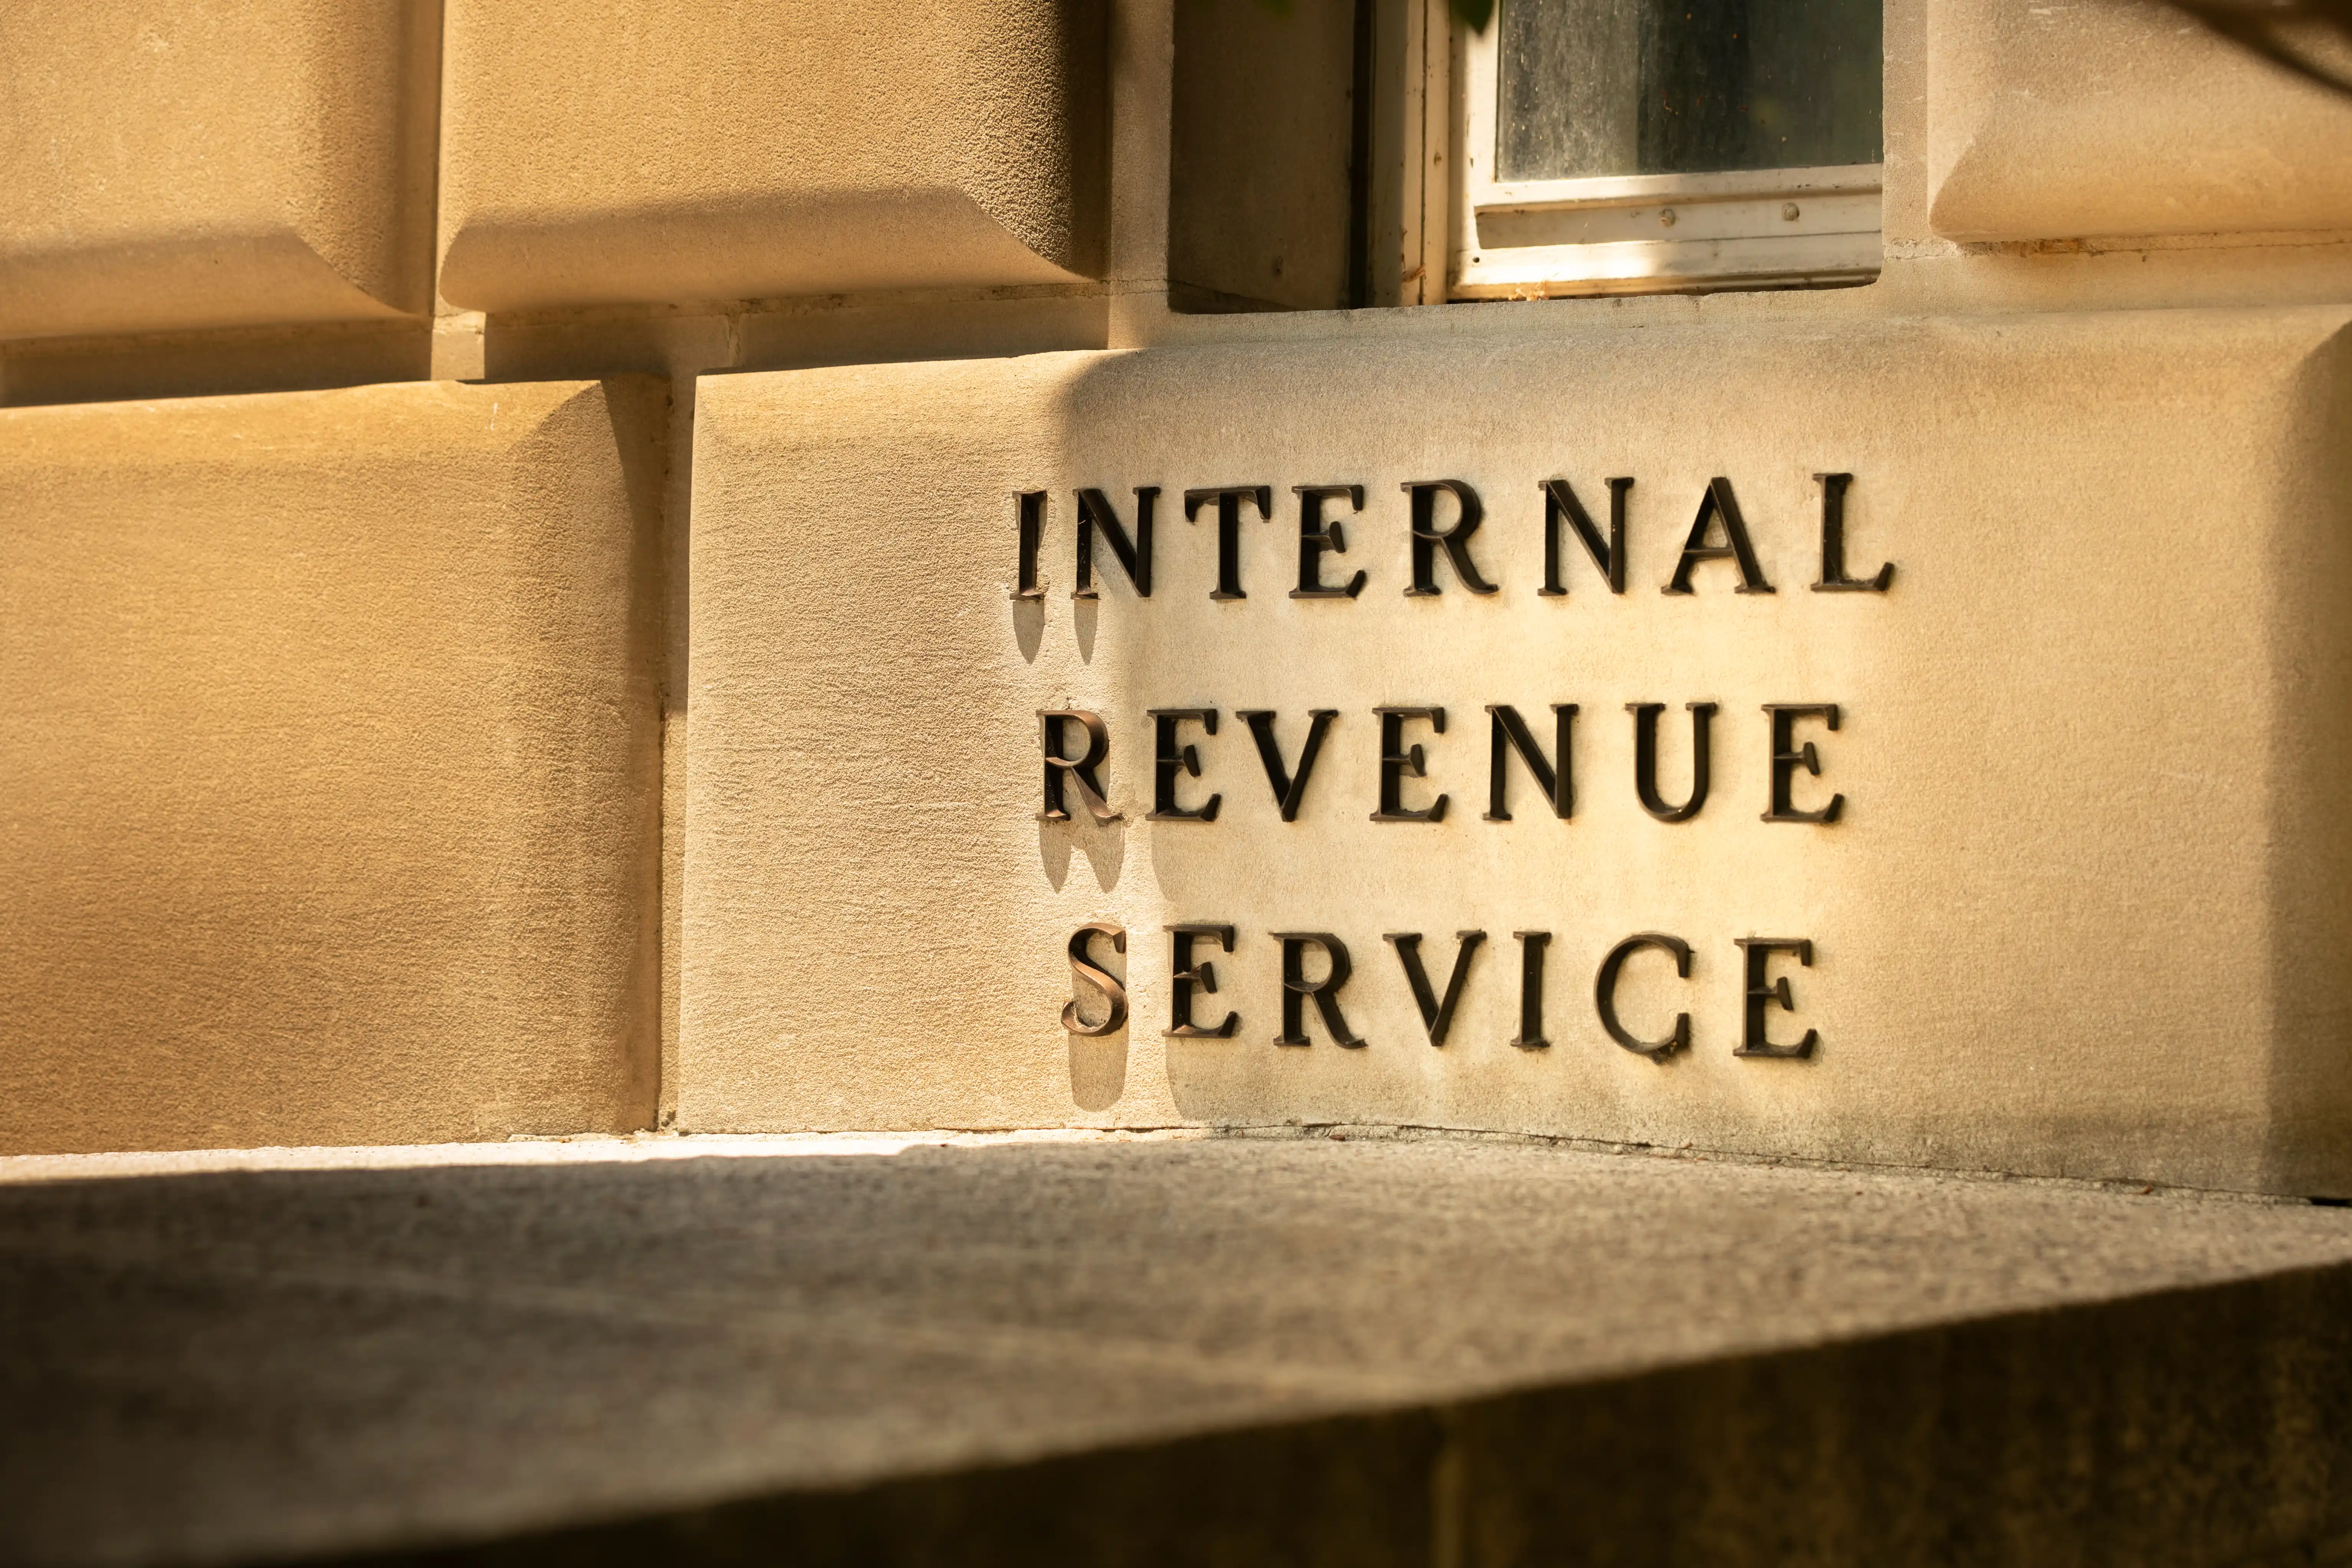 Answers to Popular Questions About the Internal Revenue Service